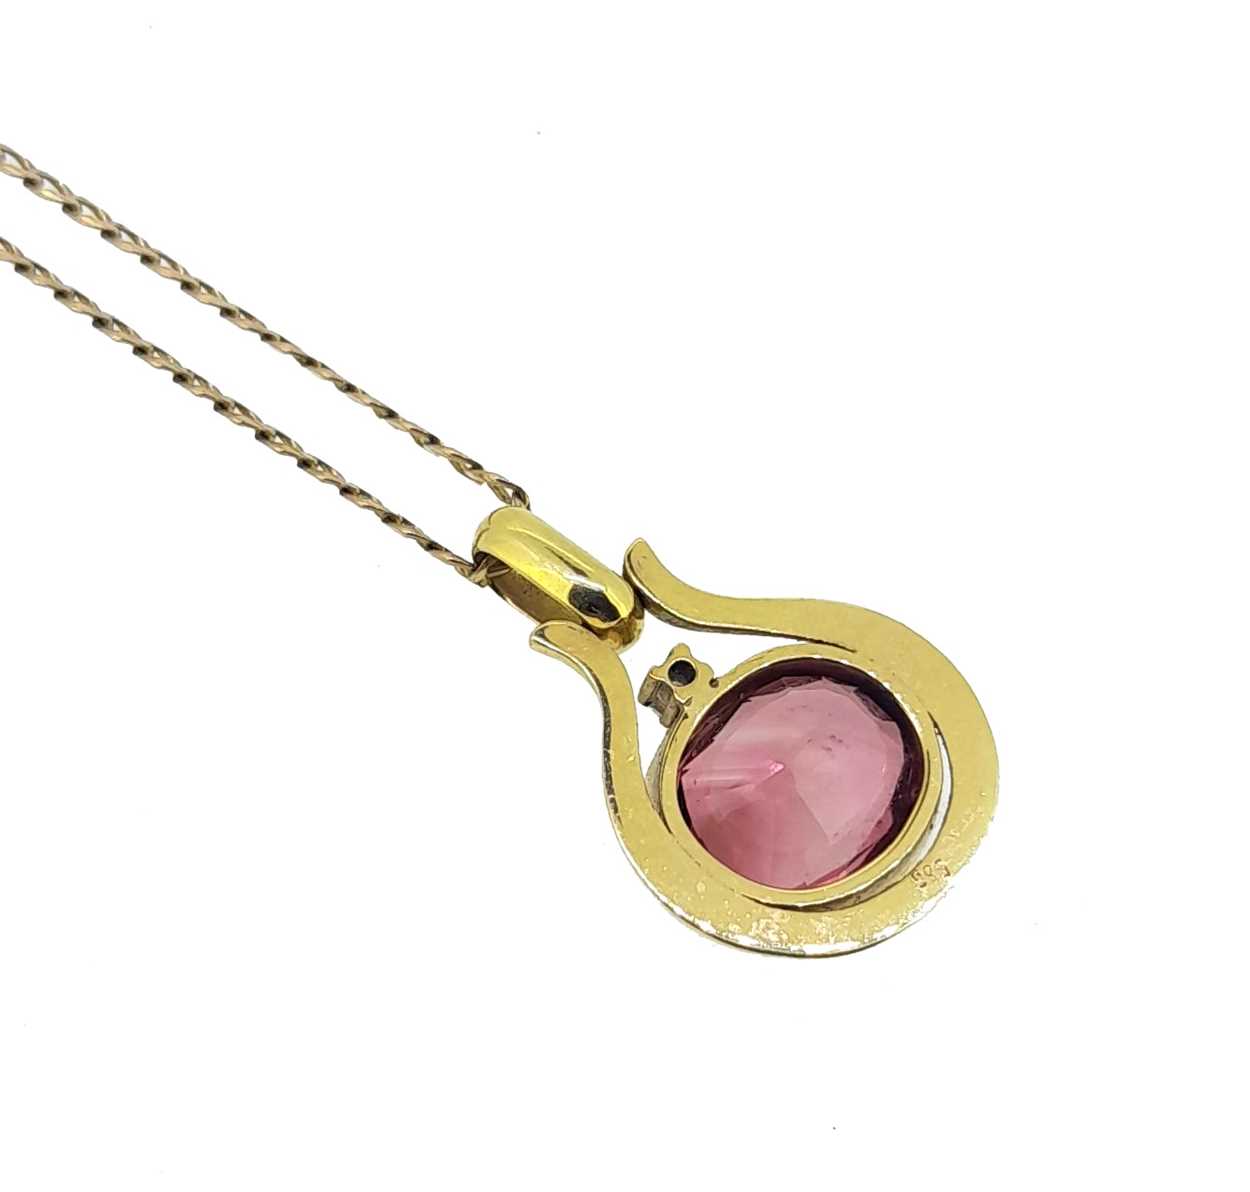 A pink tourmaline pendant and chain, - Image 3 of 3